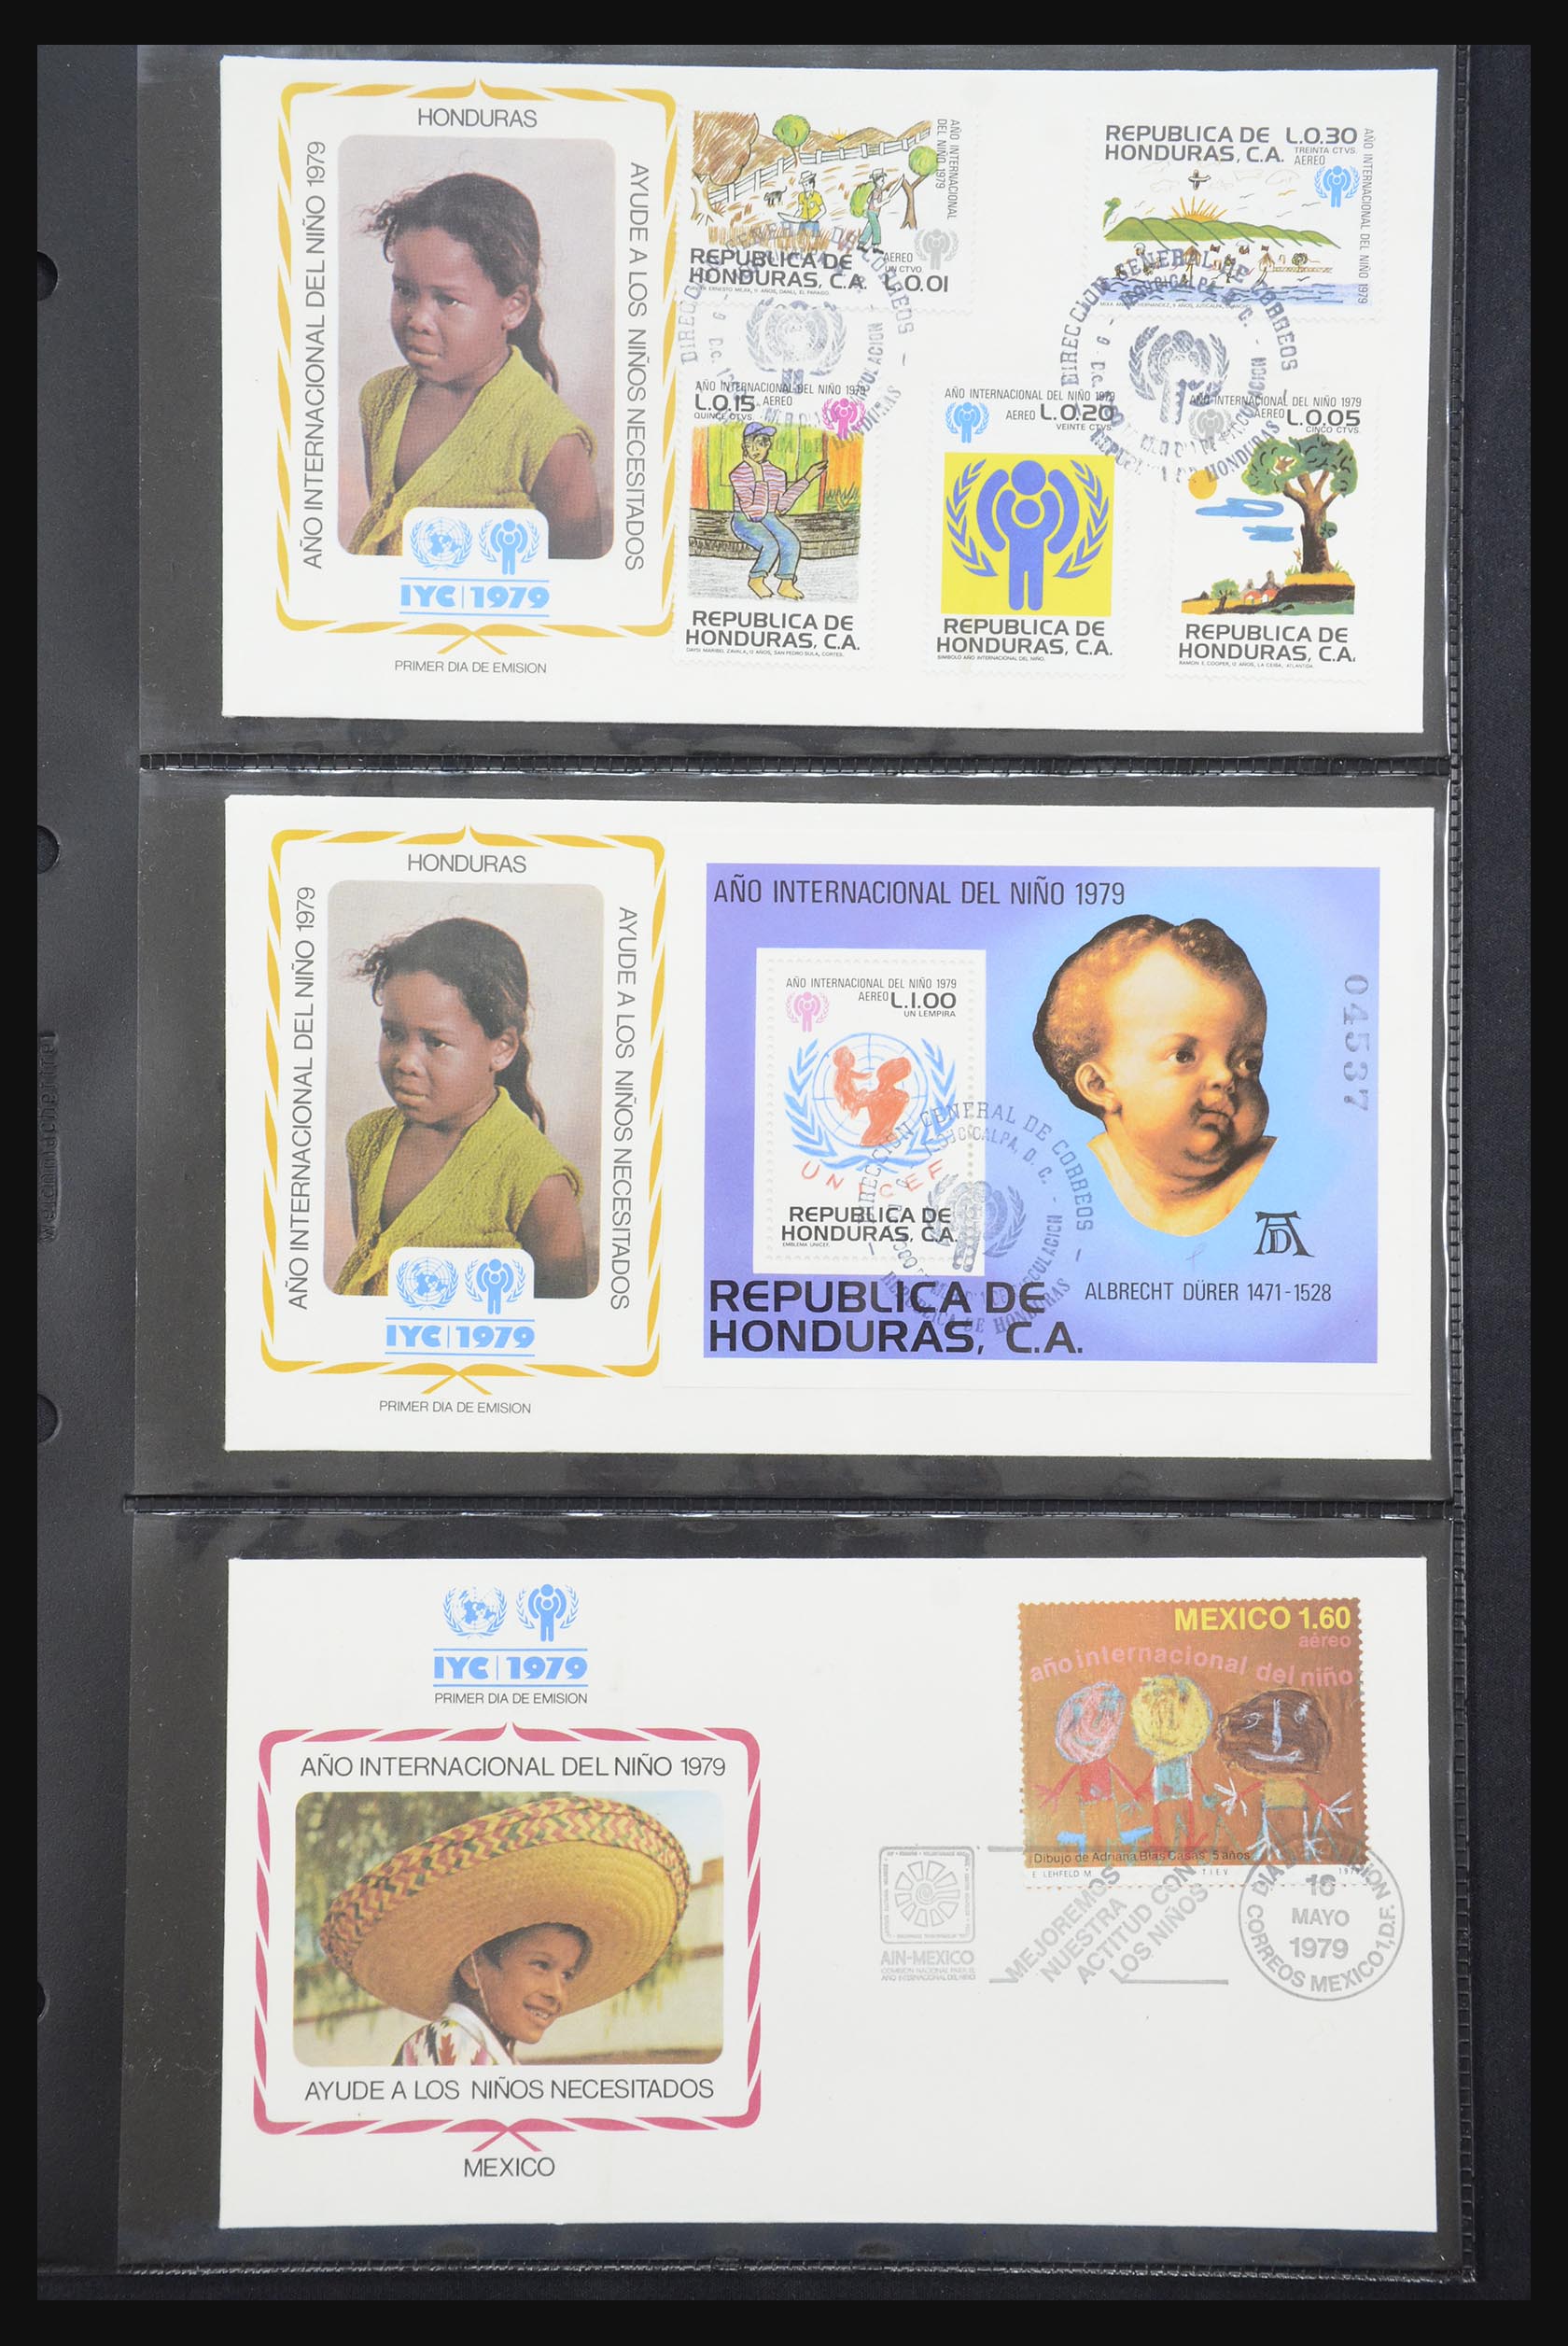 31957 074 - 31957 Unicef year of the child 1979.